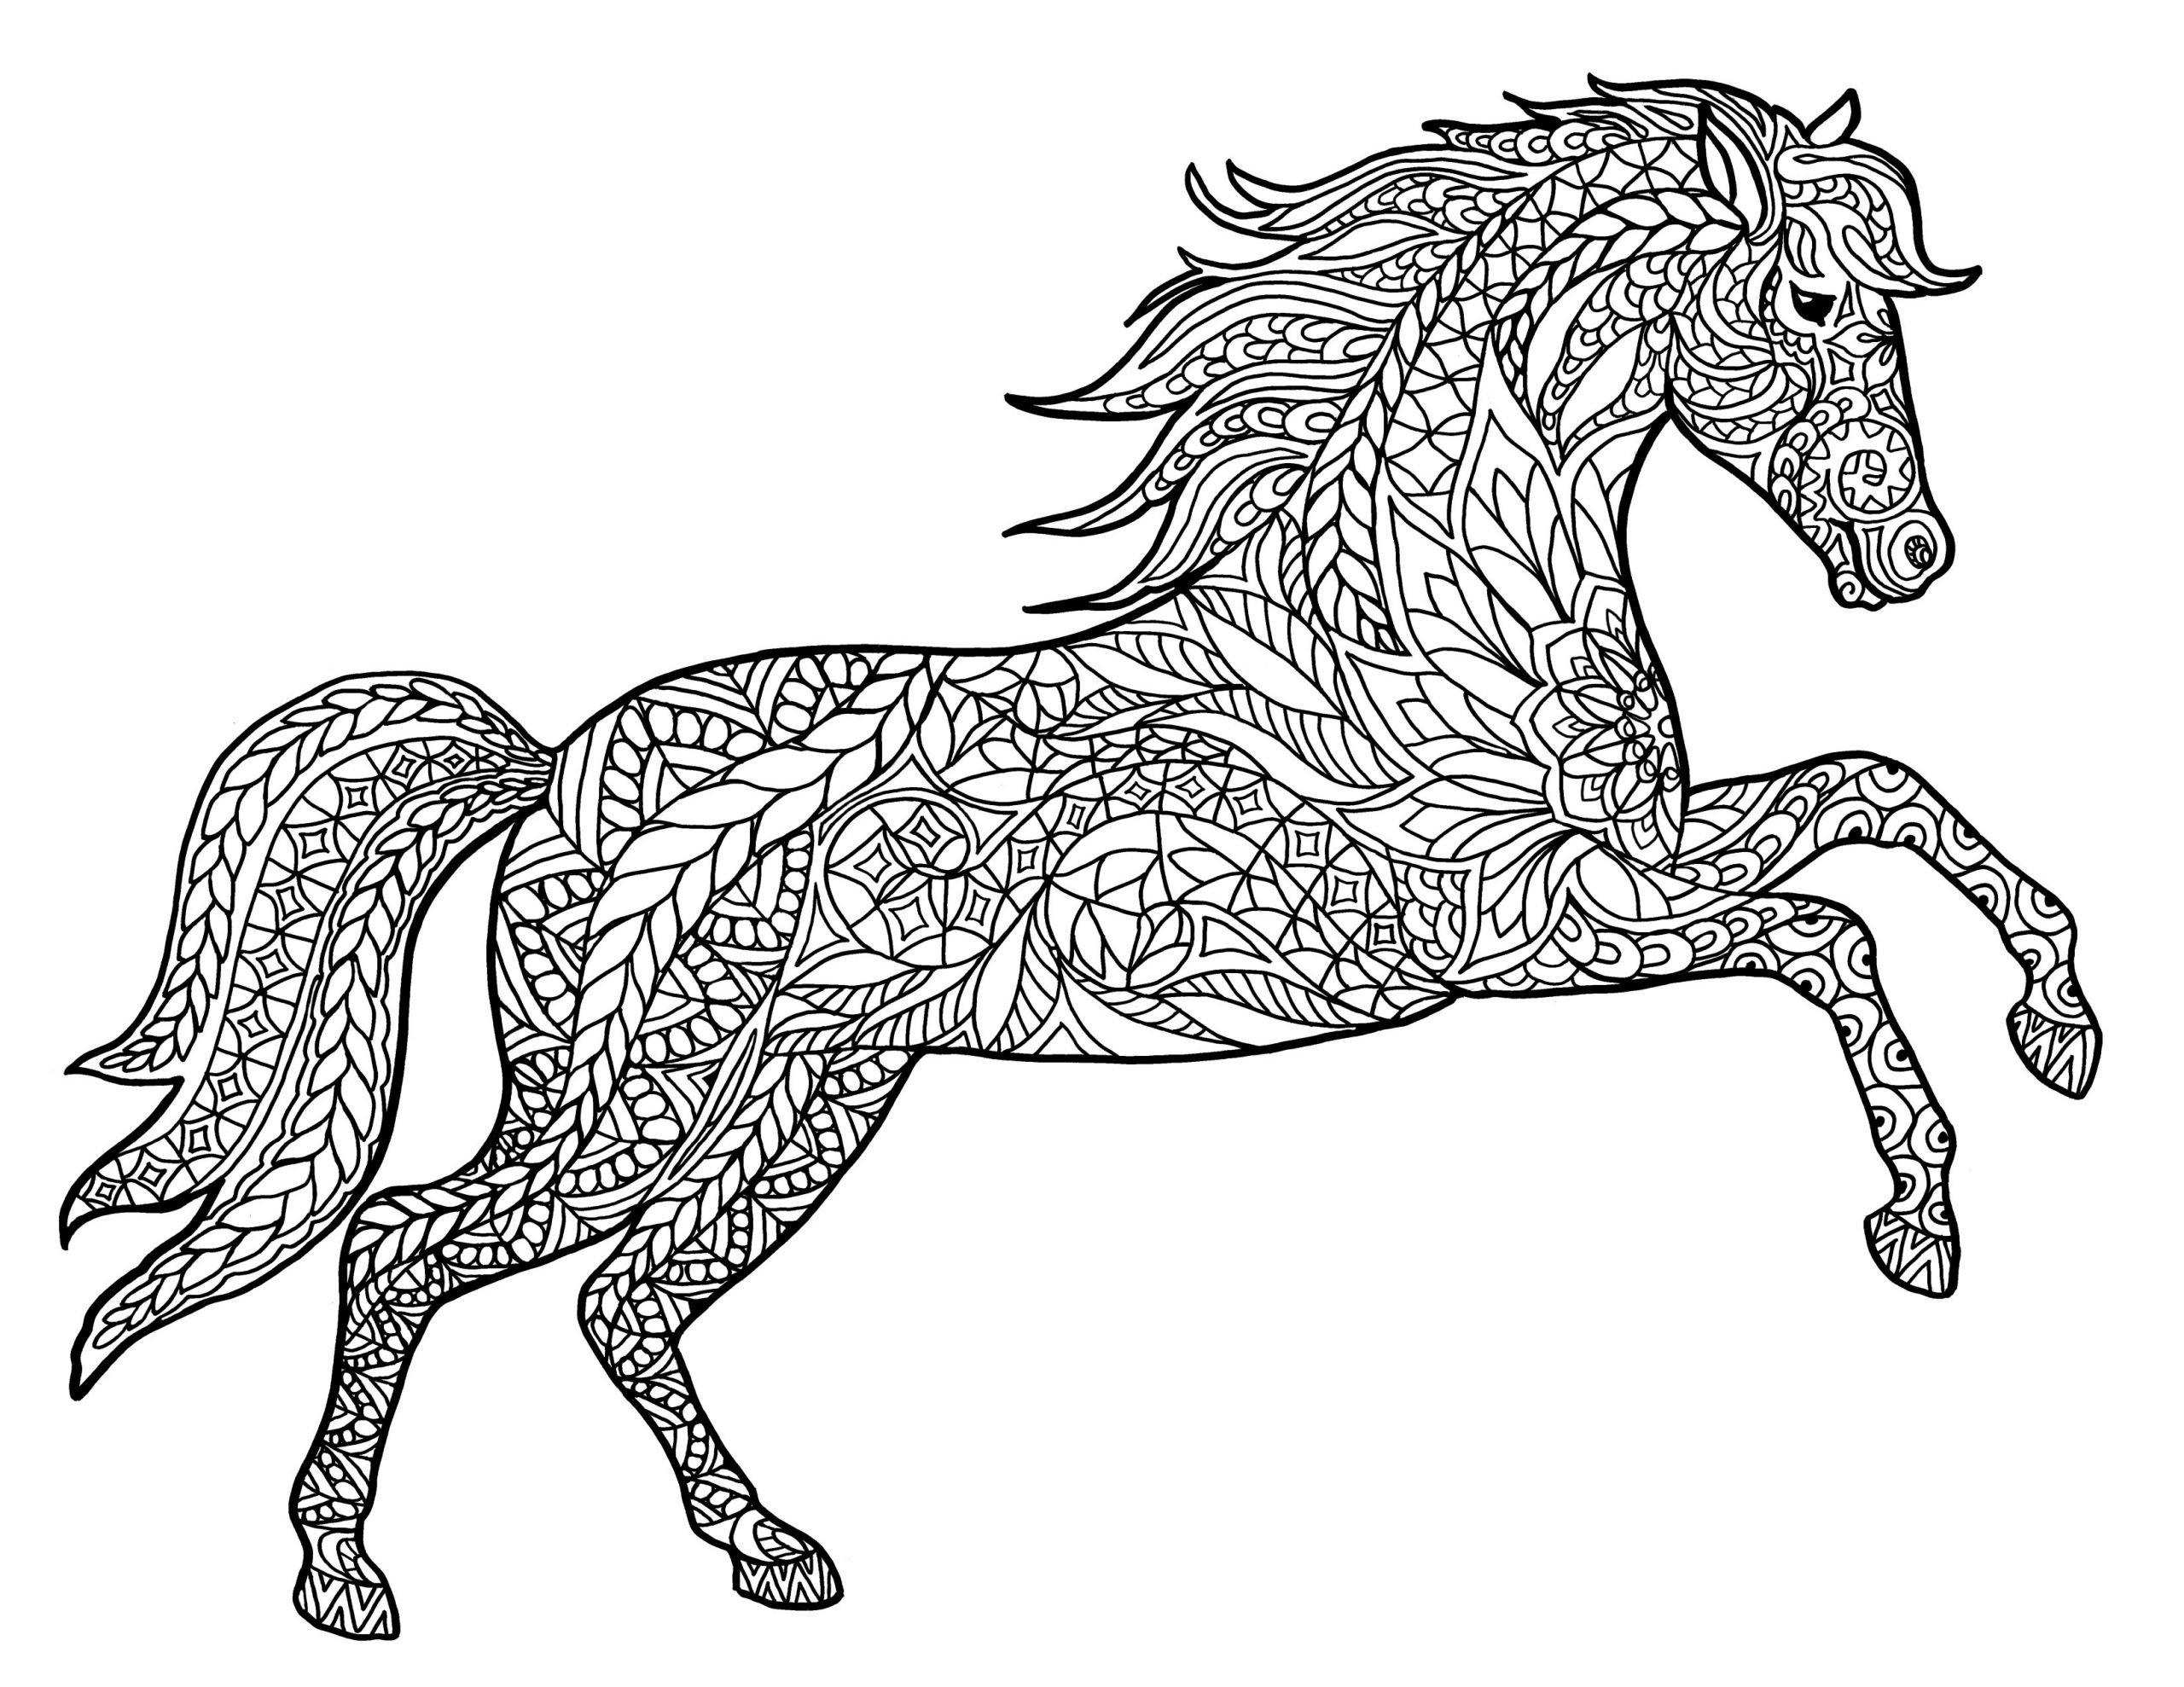 Adult Coloring Pages Horse
 Animal Coloring Pages for Adults Best Coloring Pages For